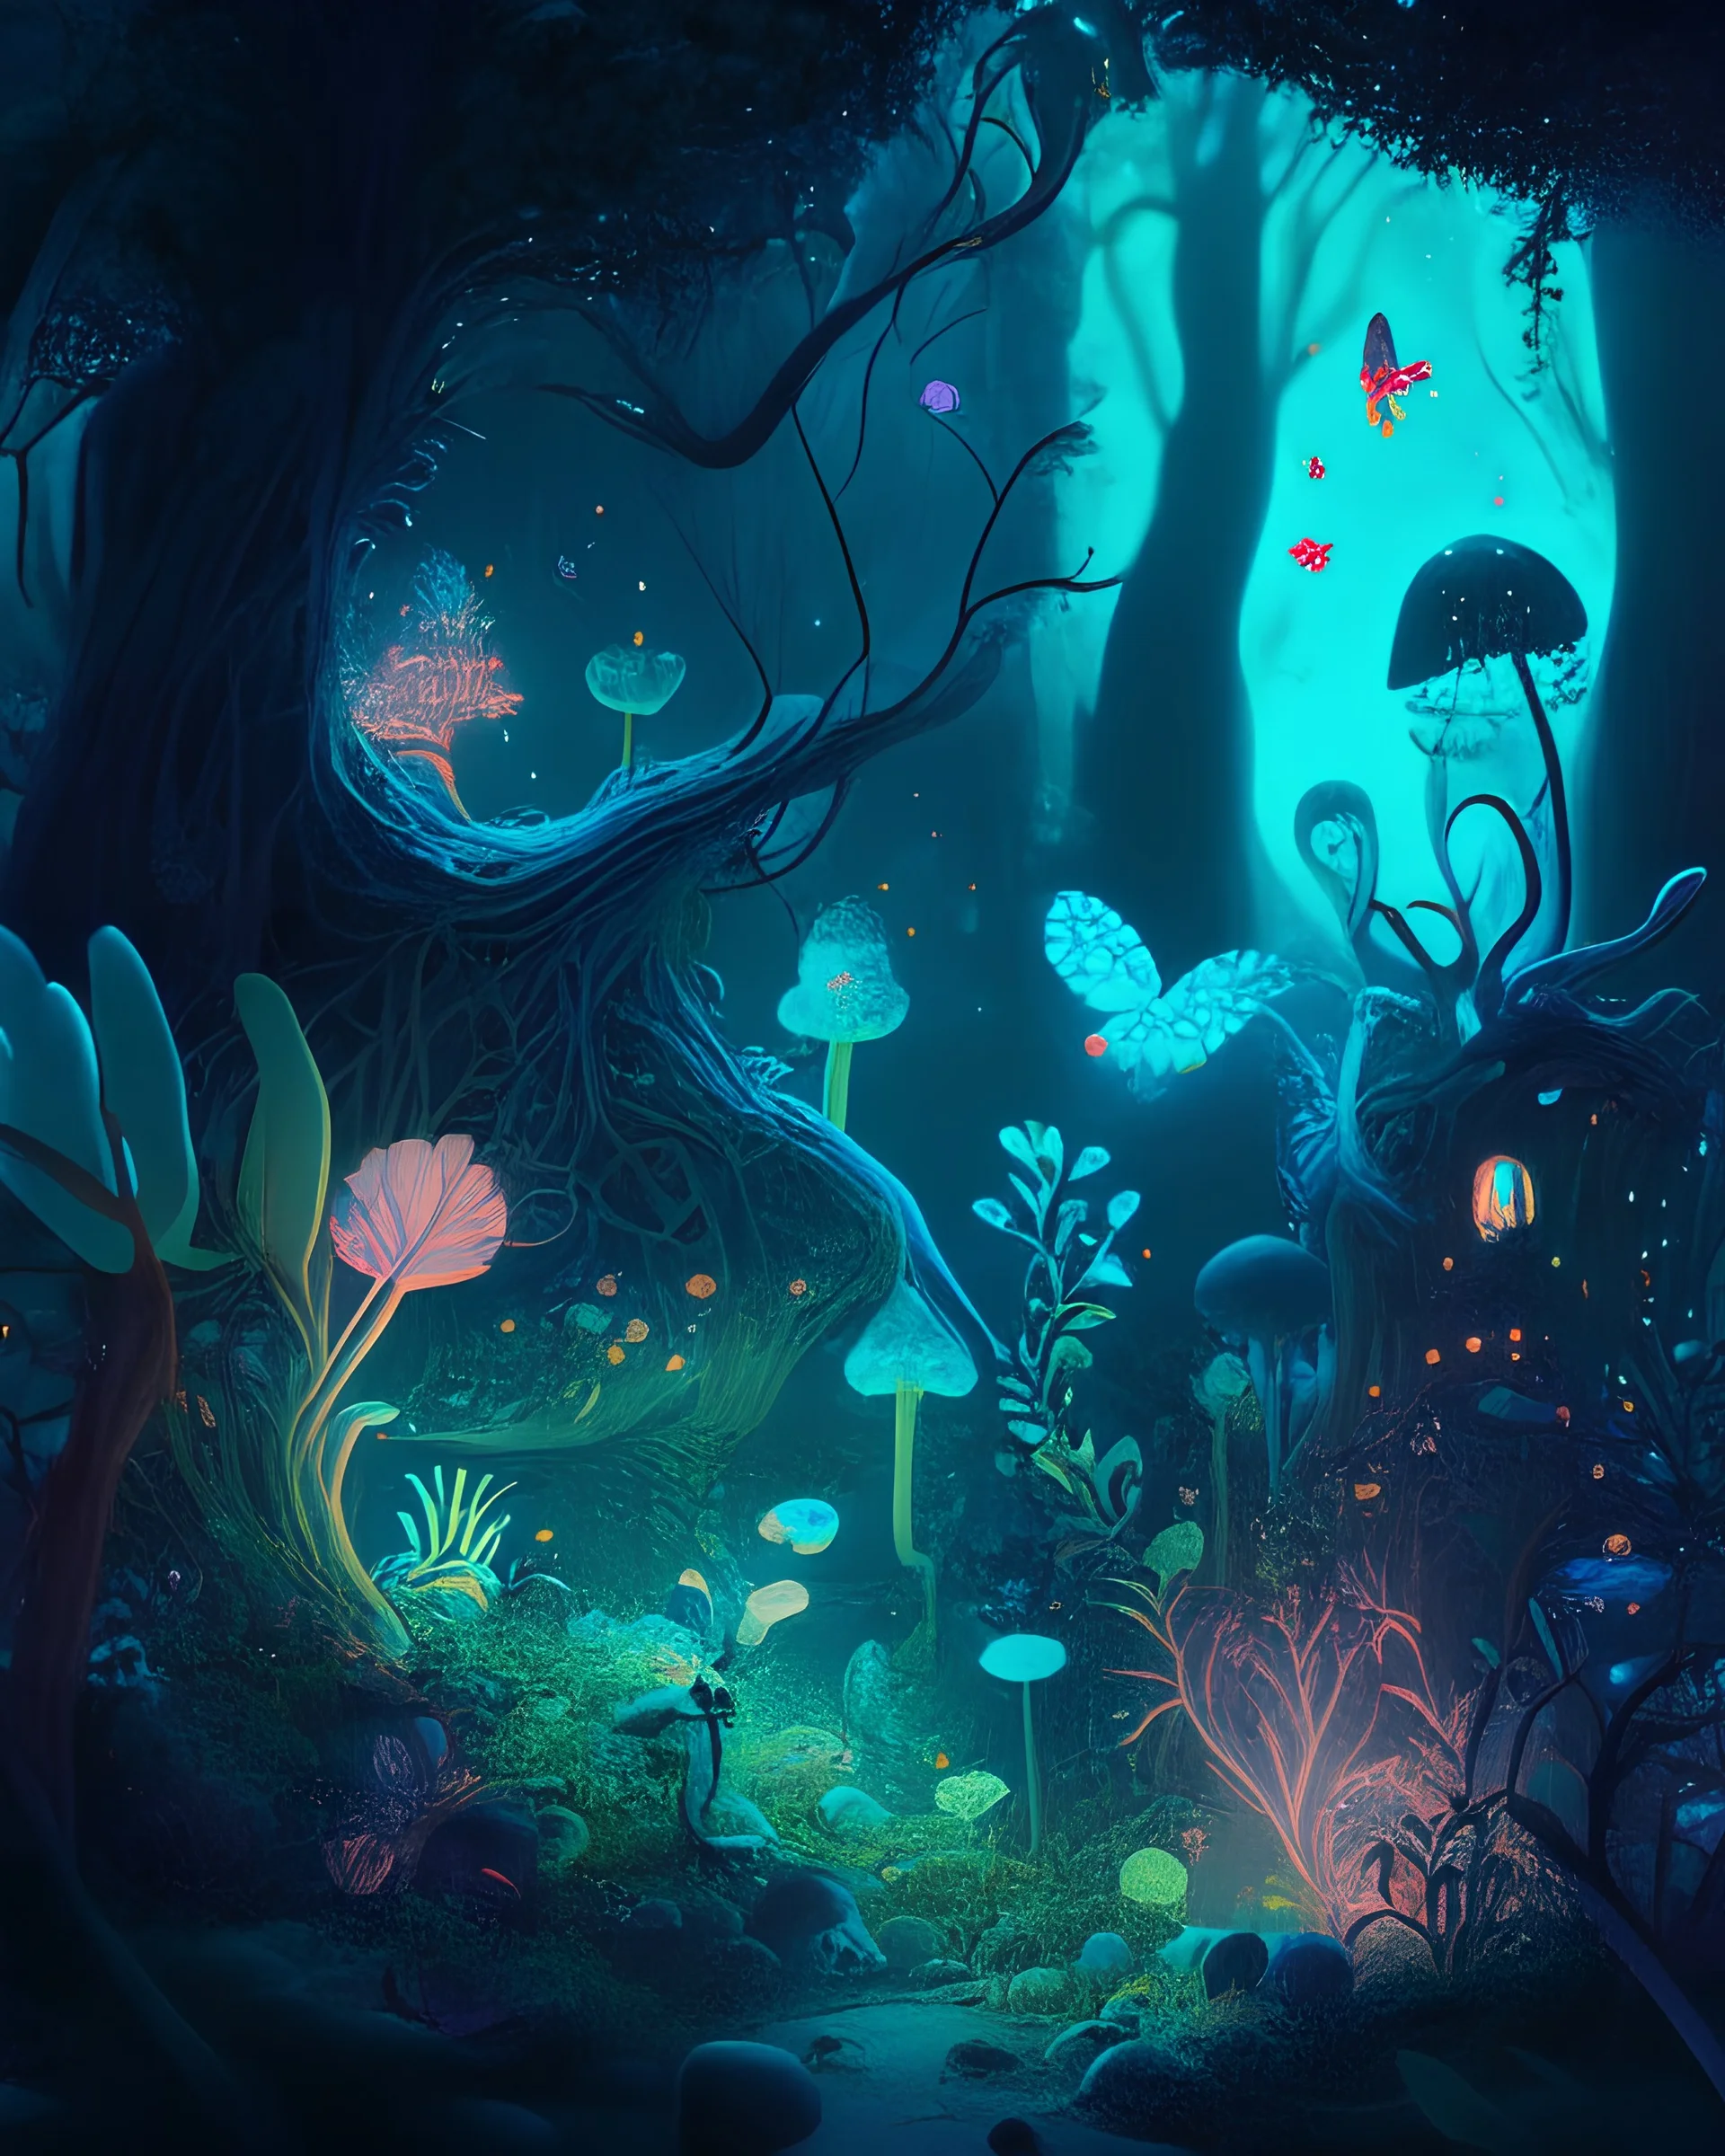 An enchanted forest with bioluminescent plants and whimsical creatures